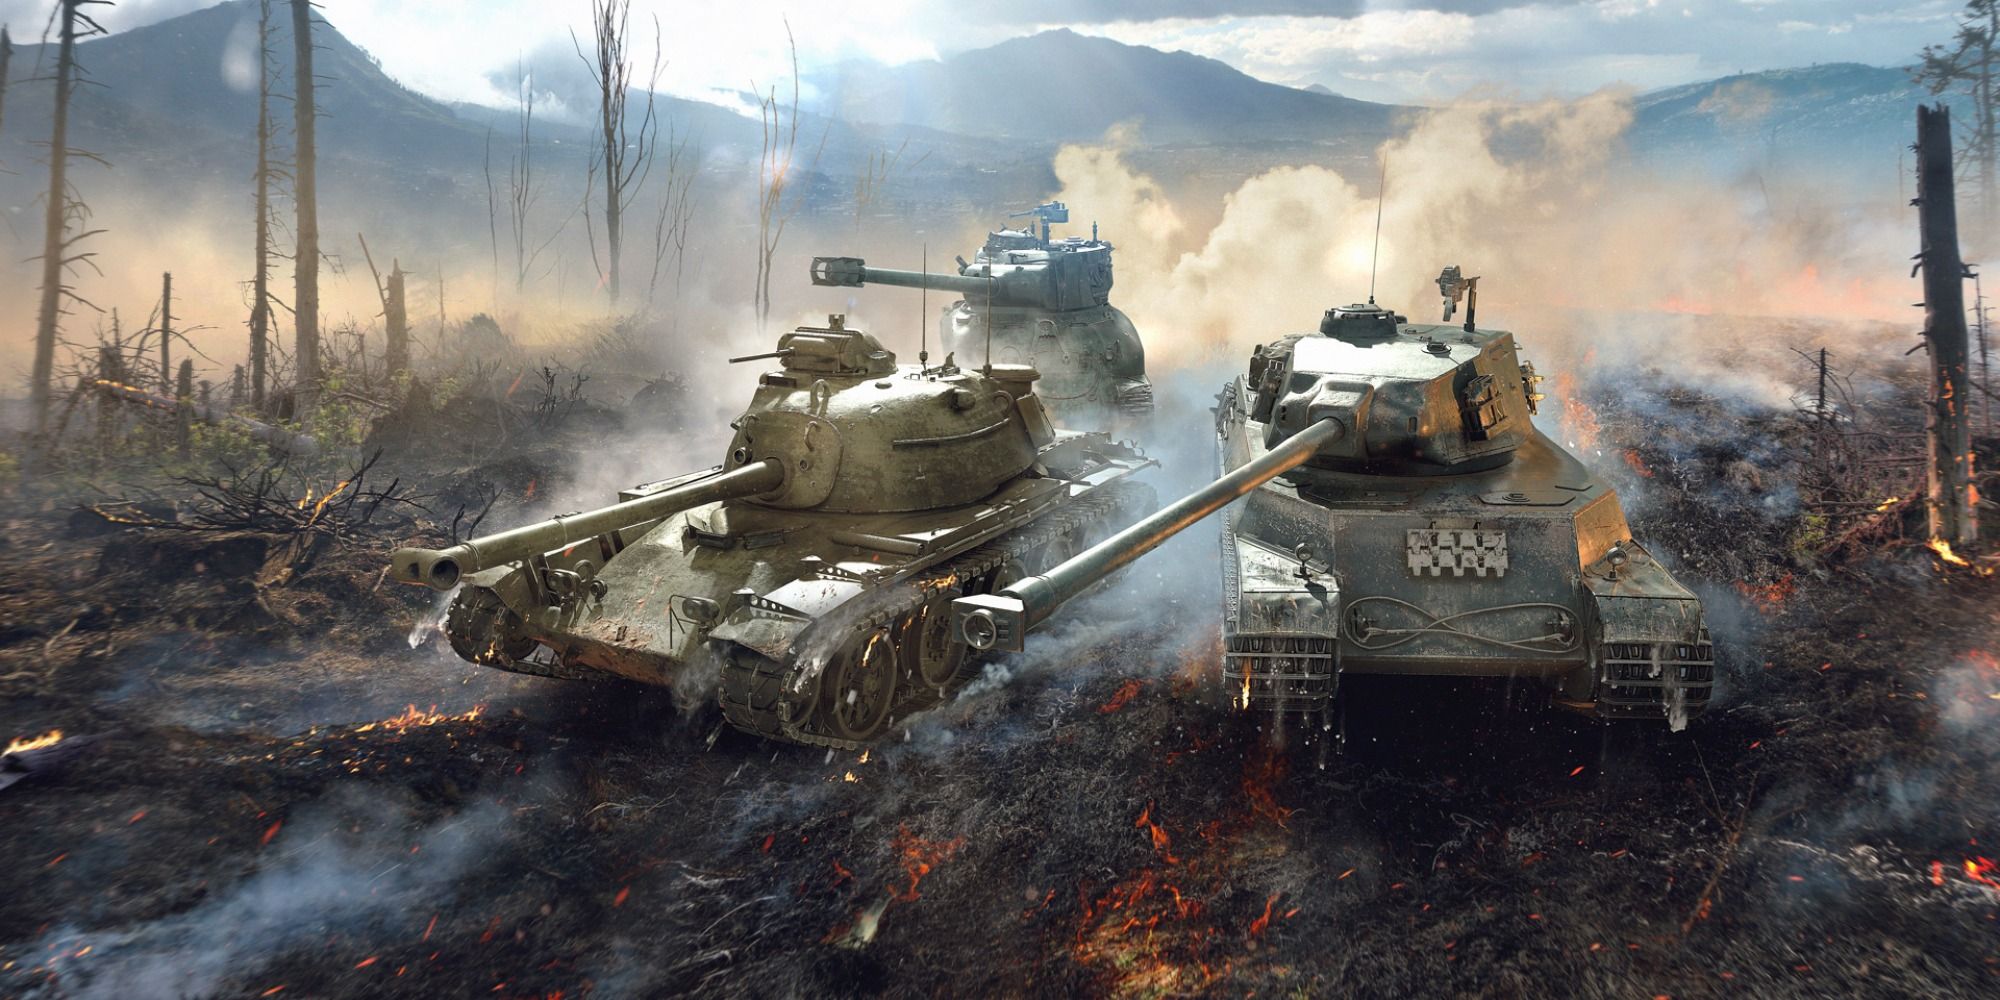 World-of-Tanks high def photo of 3 tanks and burnt forest